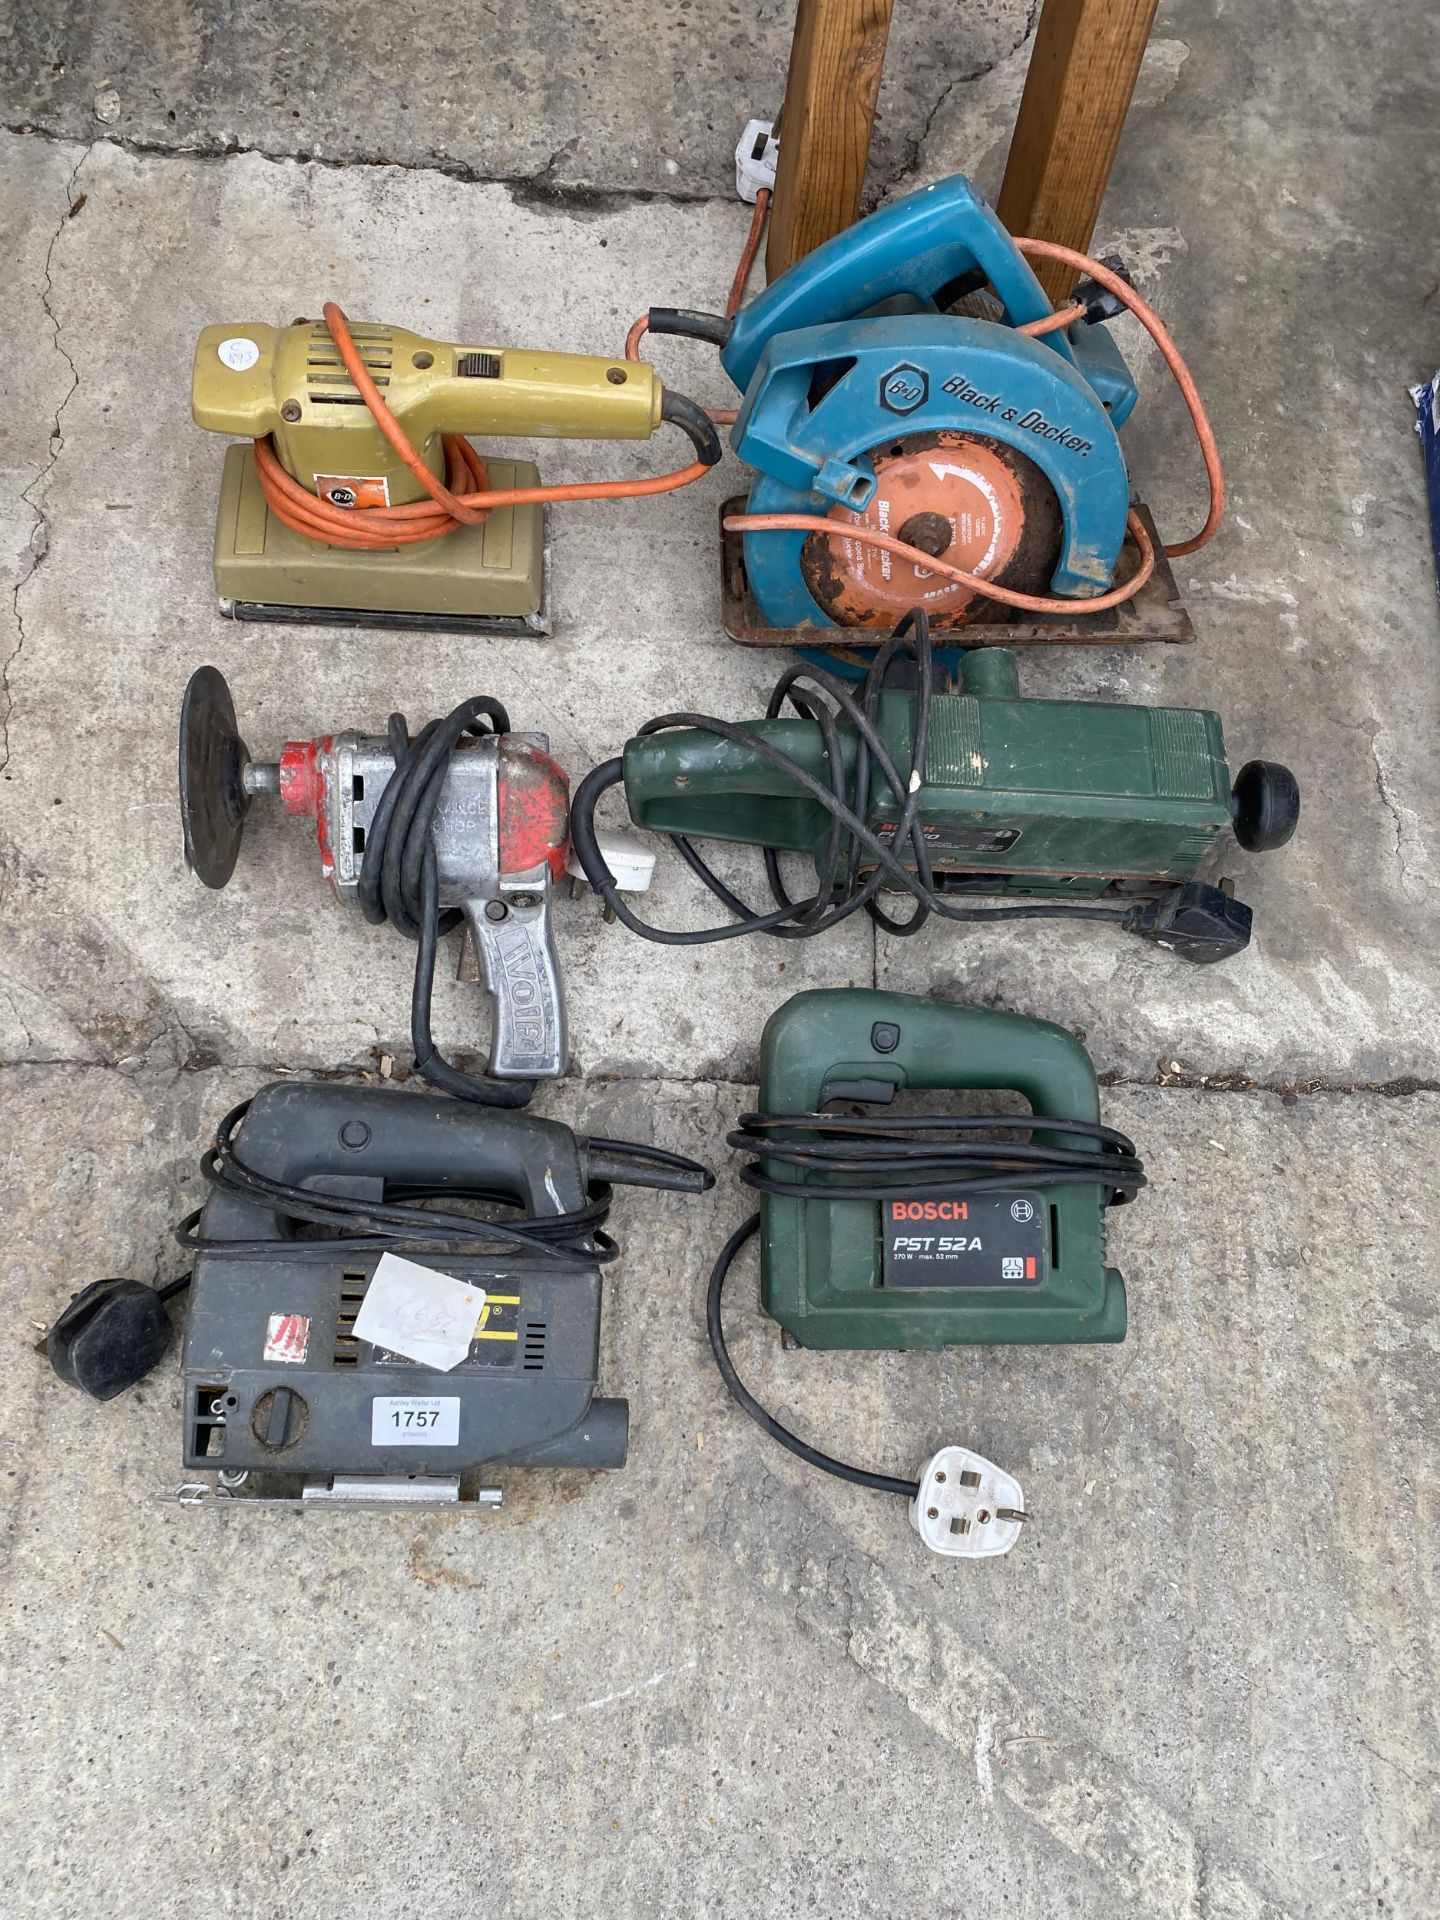 SIX VARIOUS POWER TOOLS TO INCLUDE SANDERS, ROUTERS, ETC